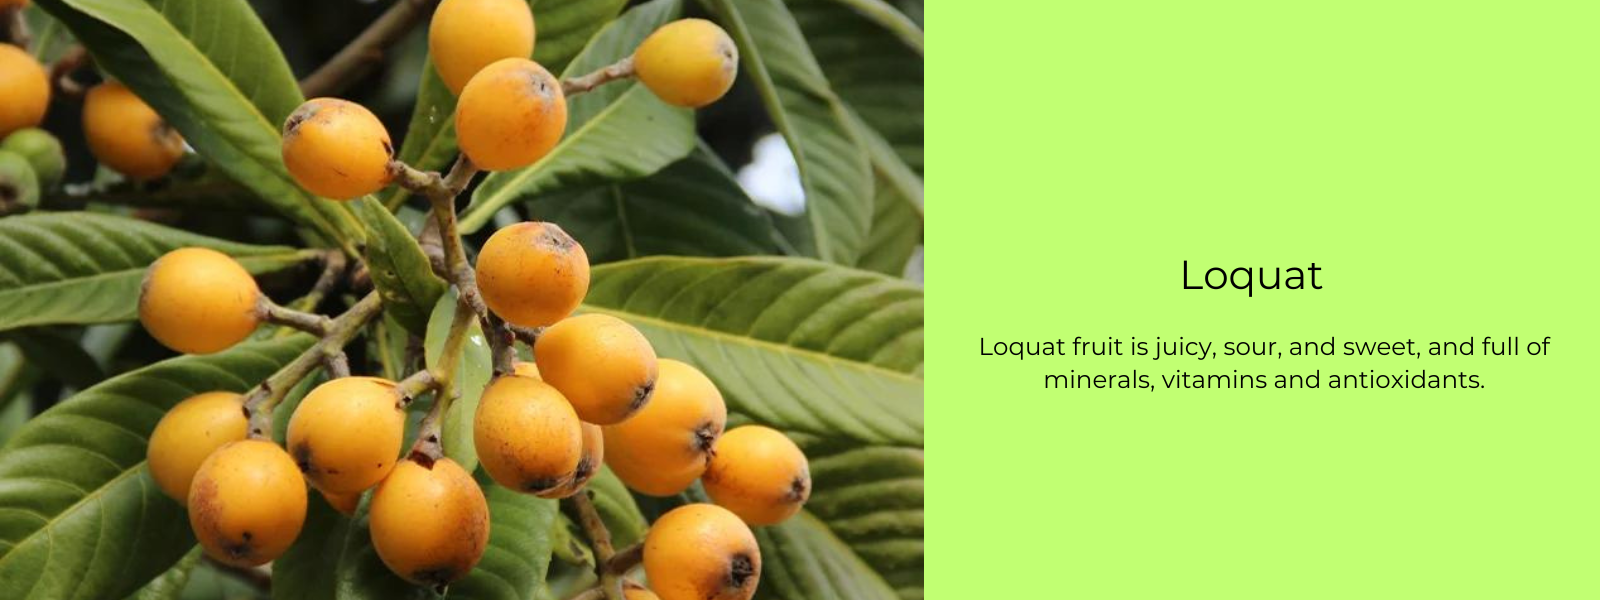 Loquat – Health Benefits, Uses and Important Facts